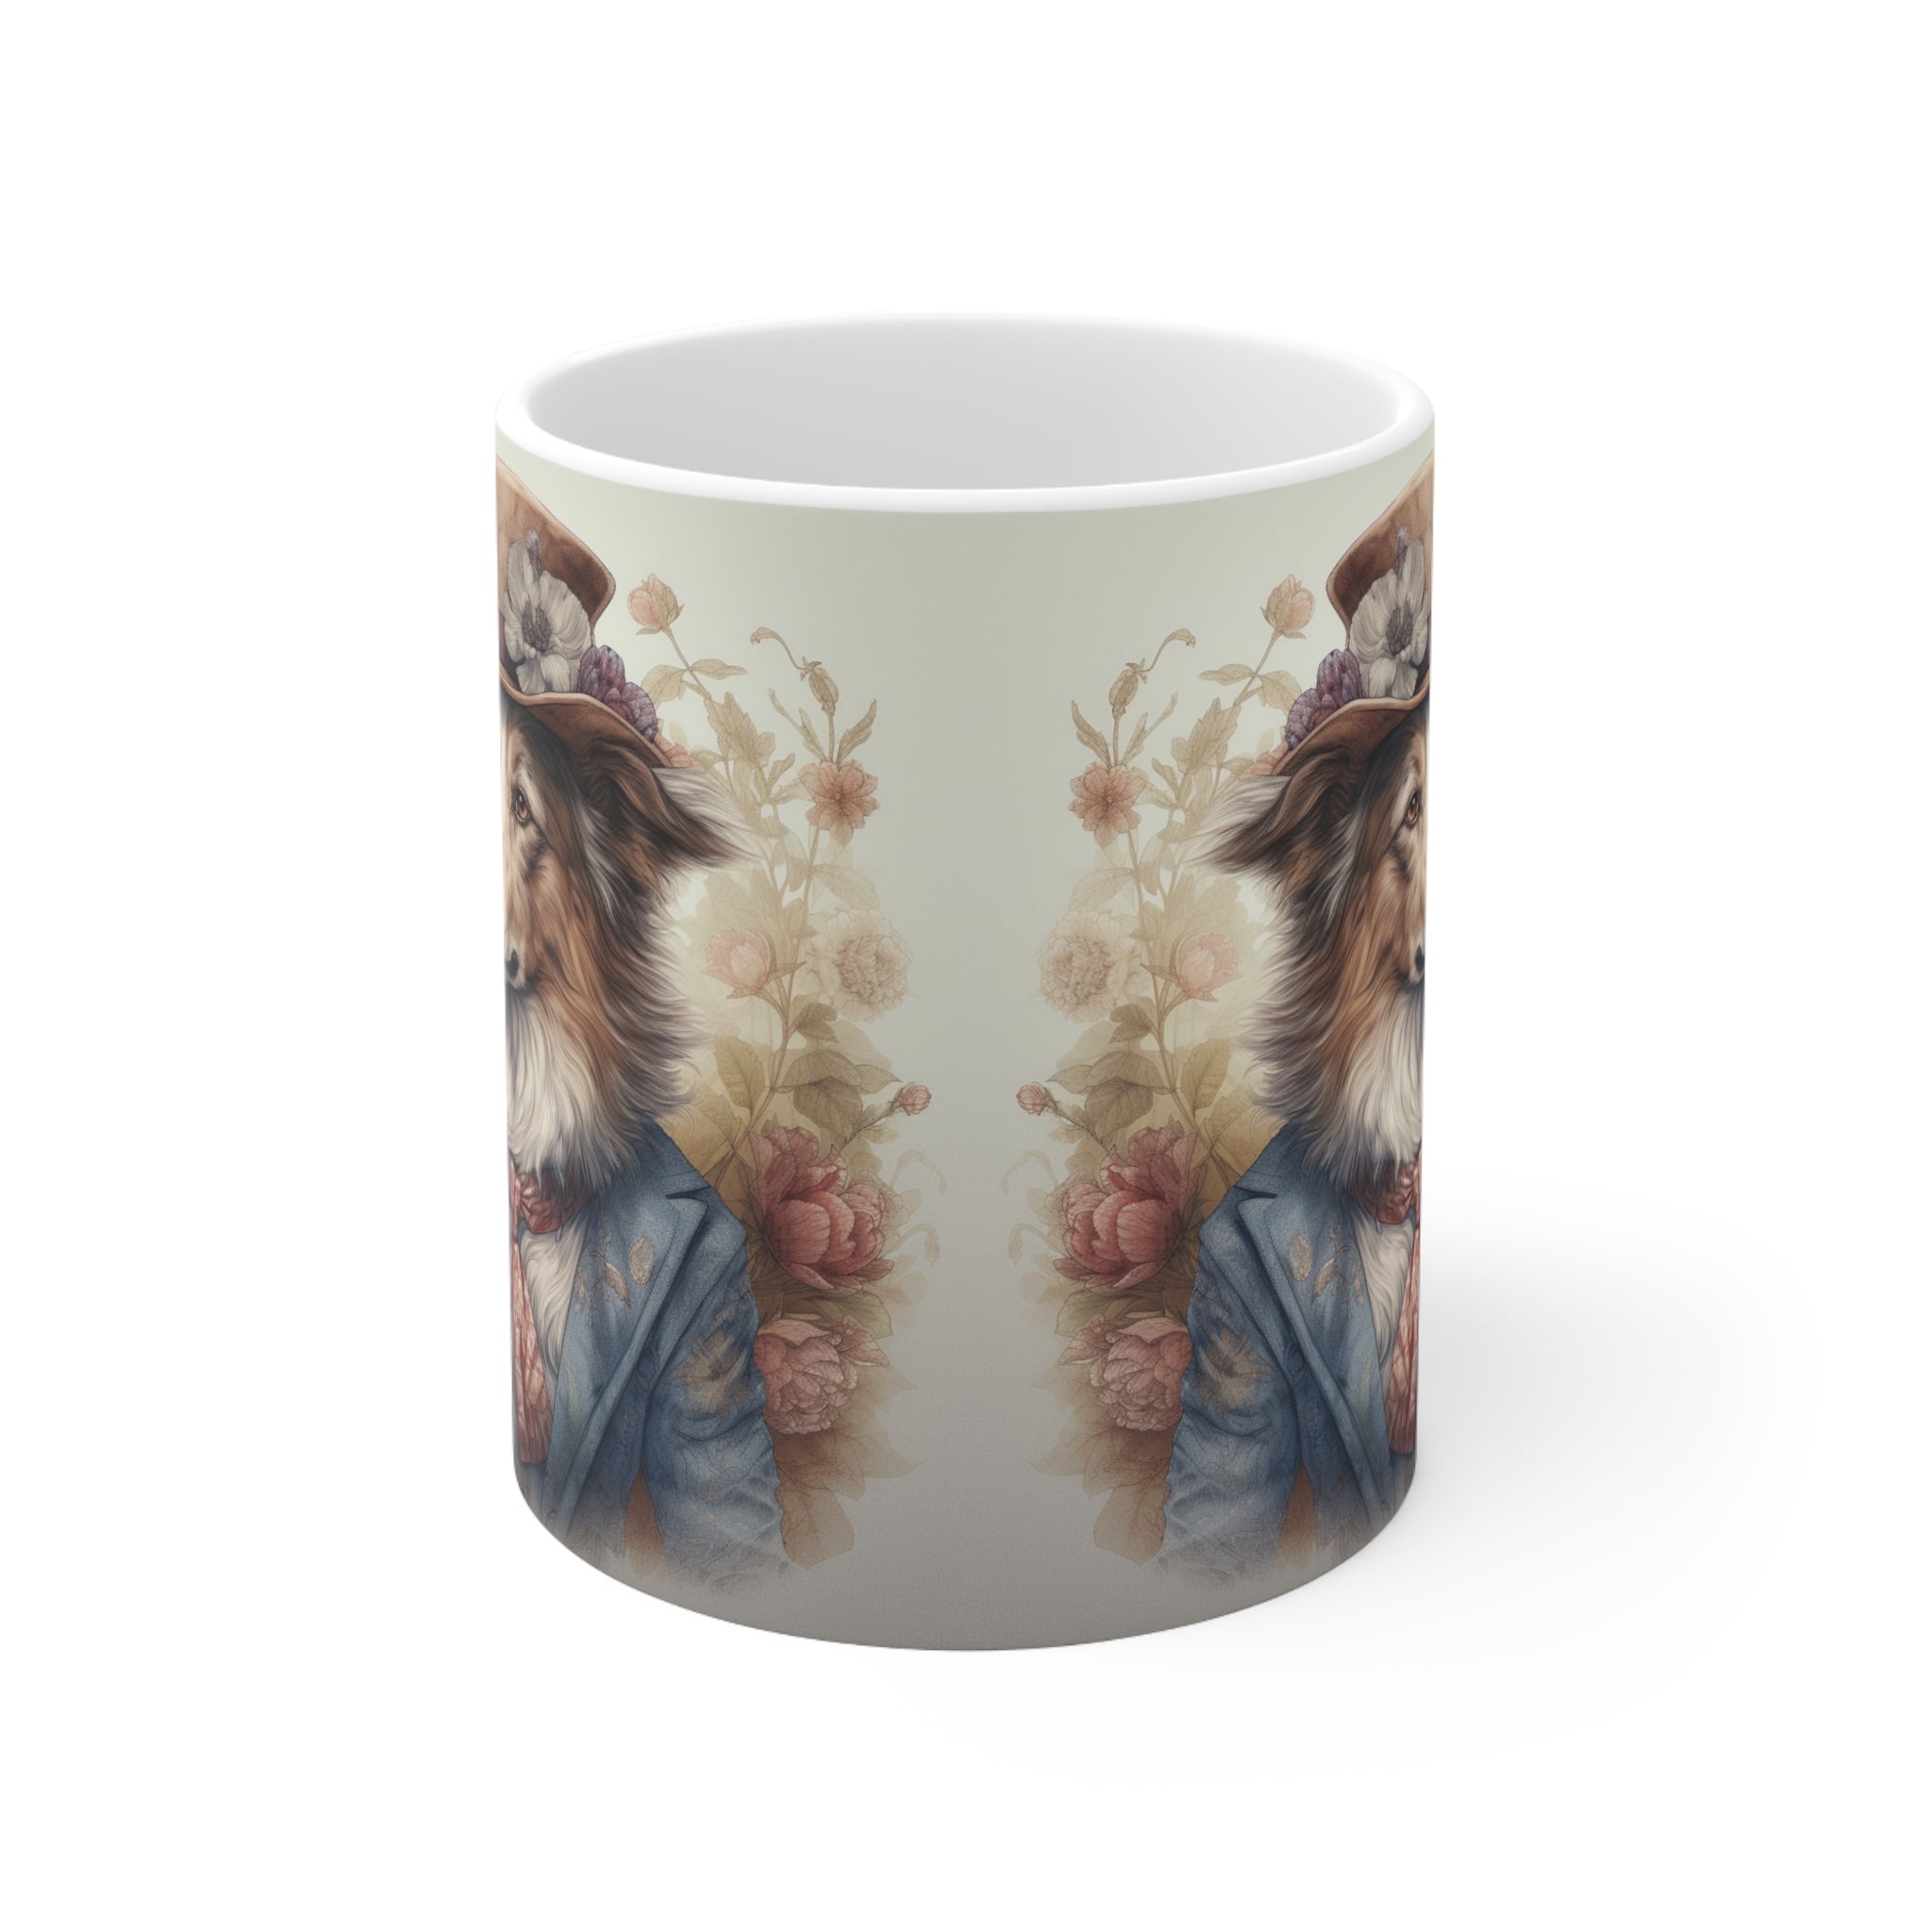 Home and Garden Relaxing Pet Lovers Coffee Mug 11oz Ceramic Mug | Exclusive Floral Doggy Design | Professional Artwork | Durable & Aesthetic Drinkware